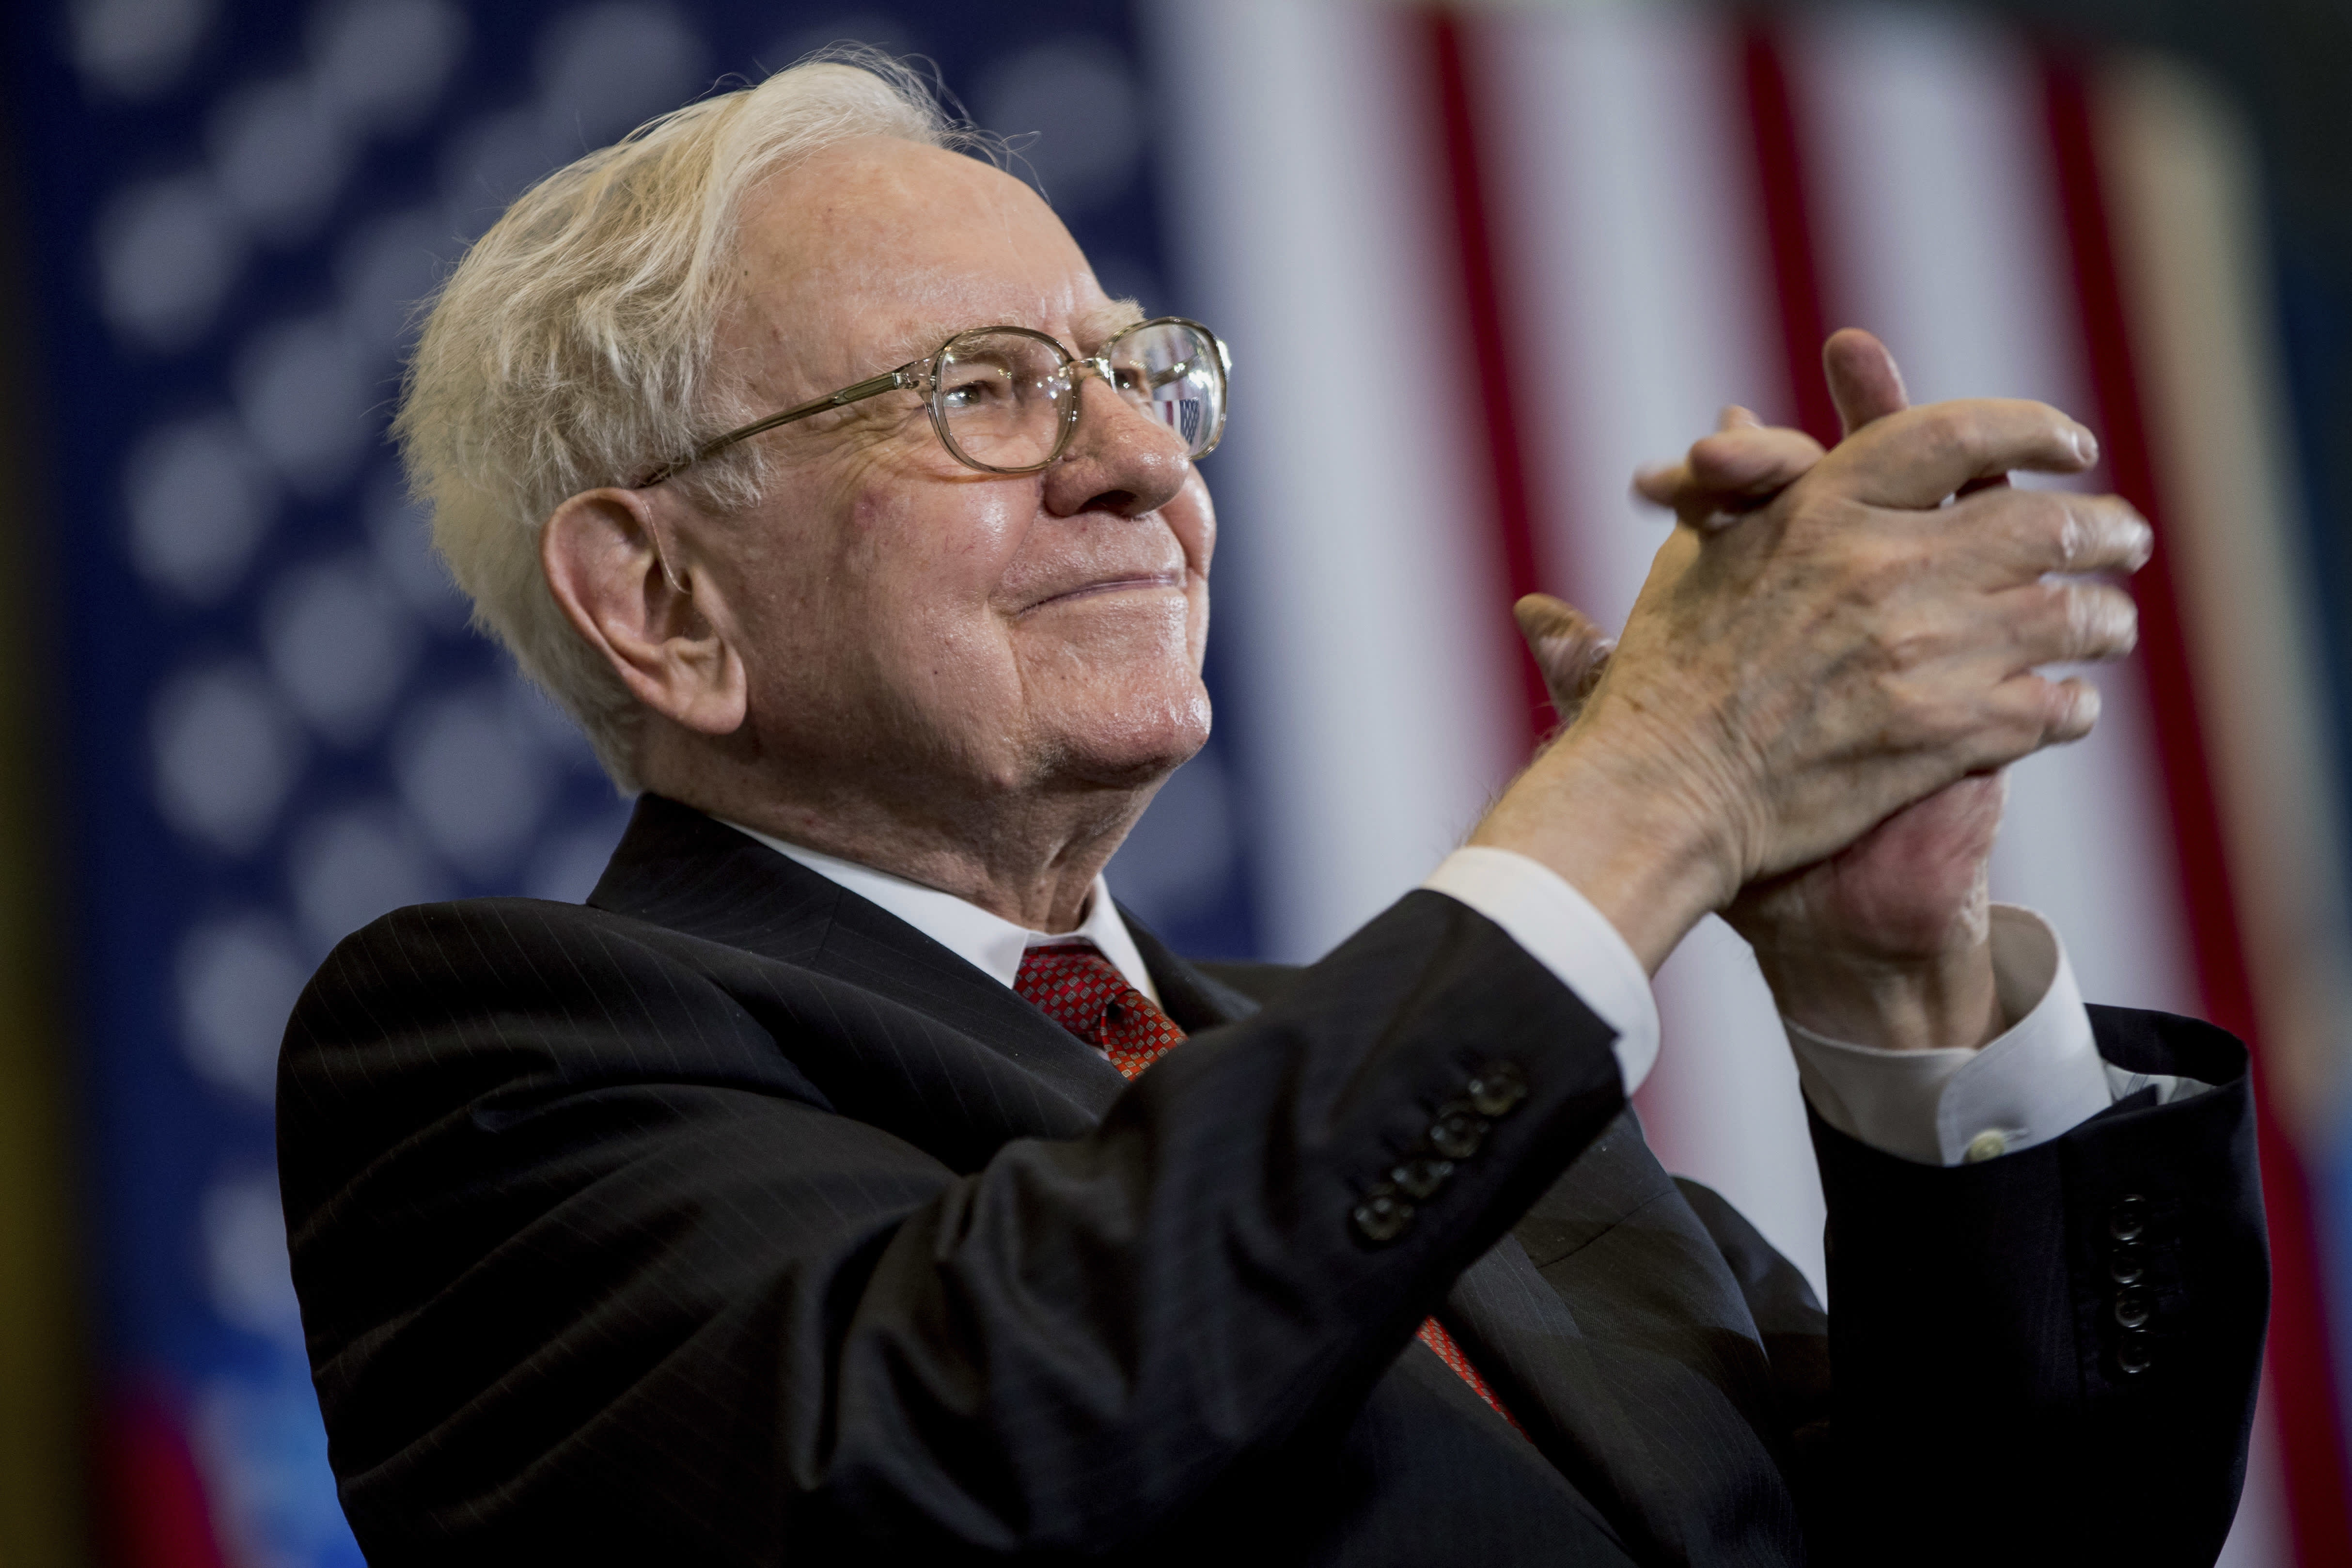 Berkshire’s operating earnings surge as Buffett repurchases record $27 billion in stock during 2021 – CNBC